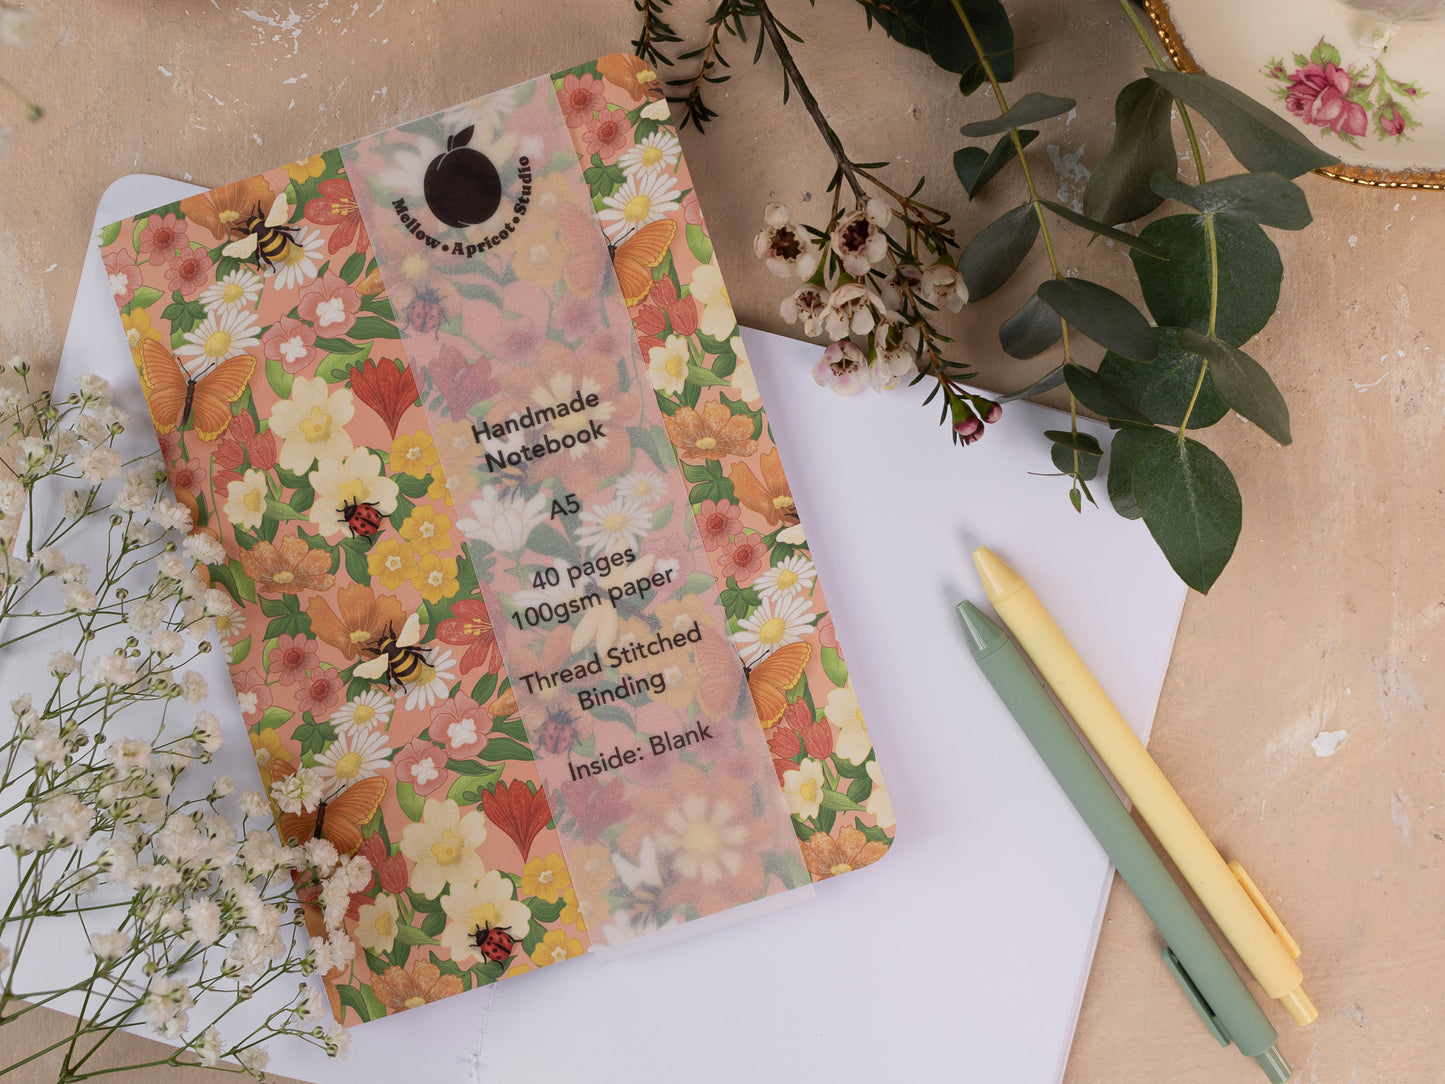 A5 Handmade Notebook with Spring Meadow Design